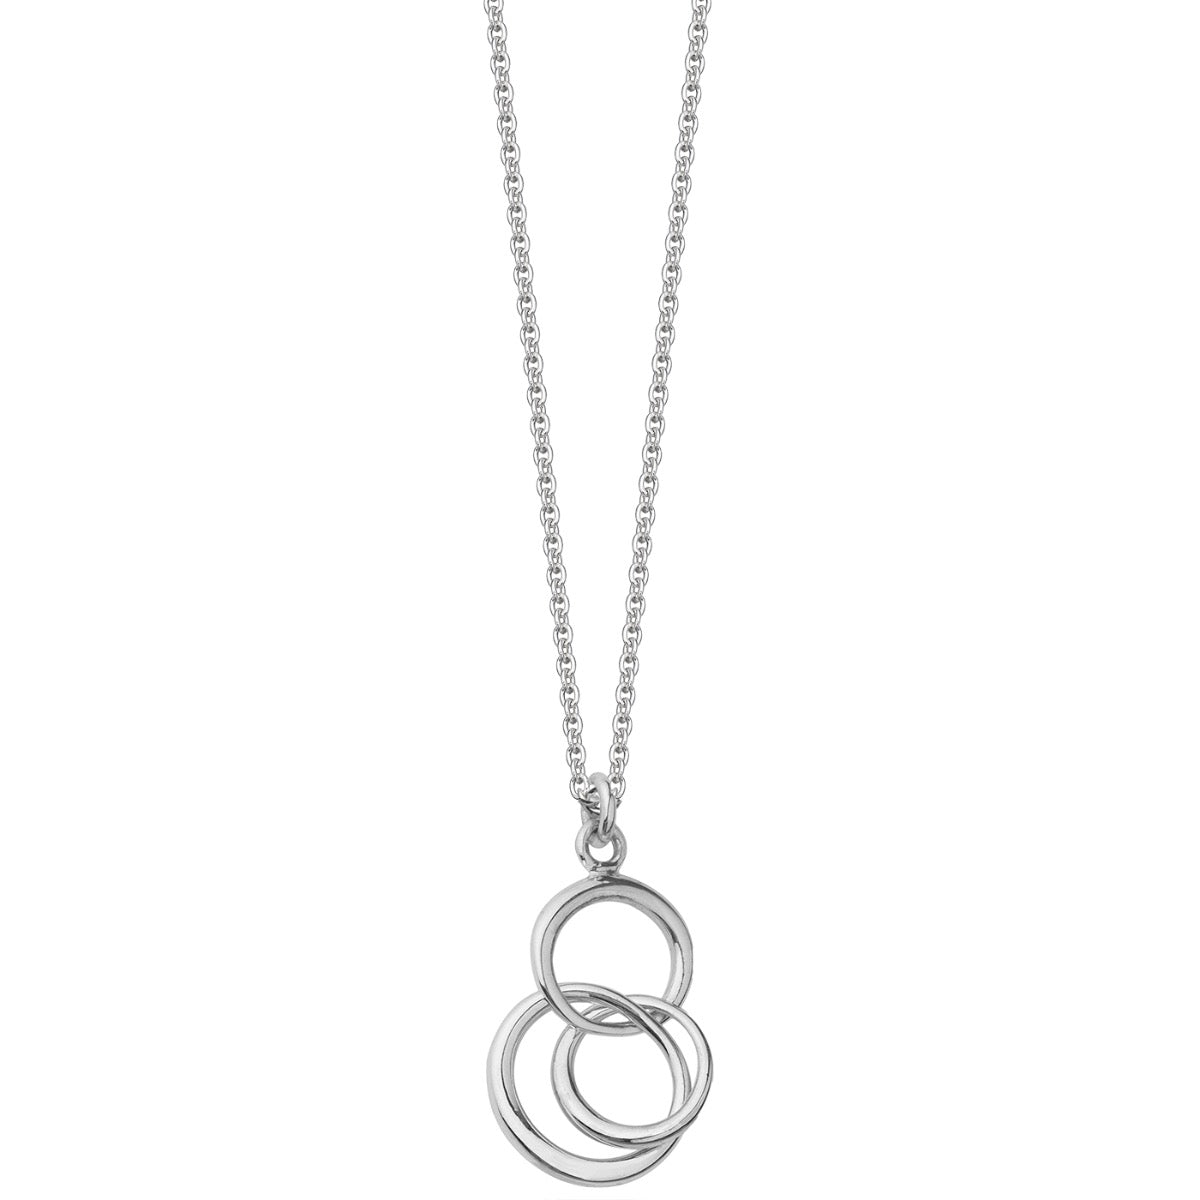 Sterling Silver Trilogy Pendant Necklace | Hersey & Son Silversmiths